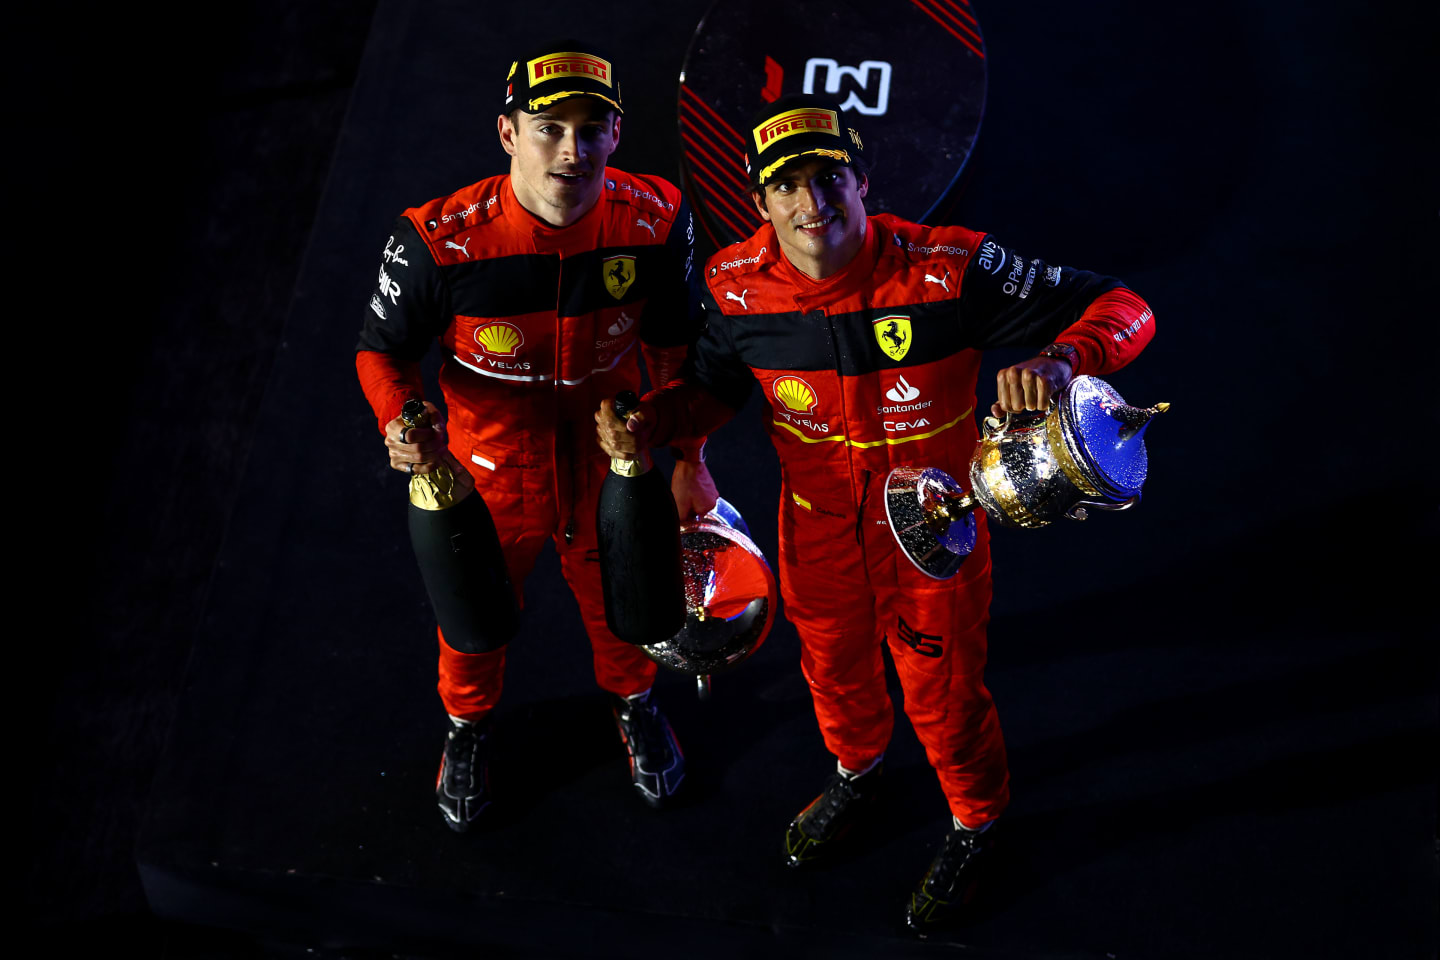 BAHRAIN, BAHRAIN - MARCH 20: Race winner Charles Leclerc of Monaco and Ferrari and Second placed Carlos Sainz of Spain and Ferrari celebrate on the podium during the F1 Grand Prix of Bahrain at Bahrain International Circuit on March 20, 2022 in Bahrain, Bahrain. (Photo by Mark Thompson/Getty Images)